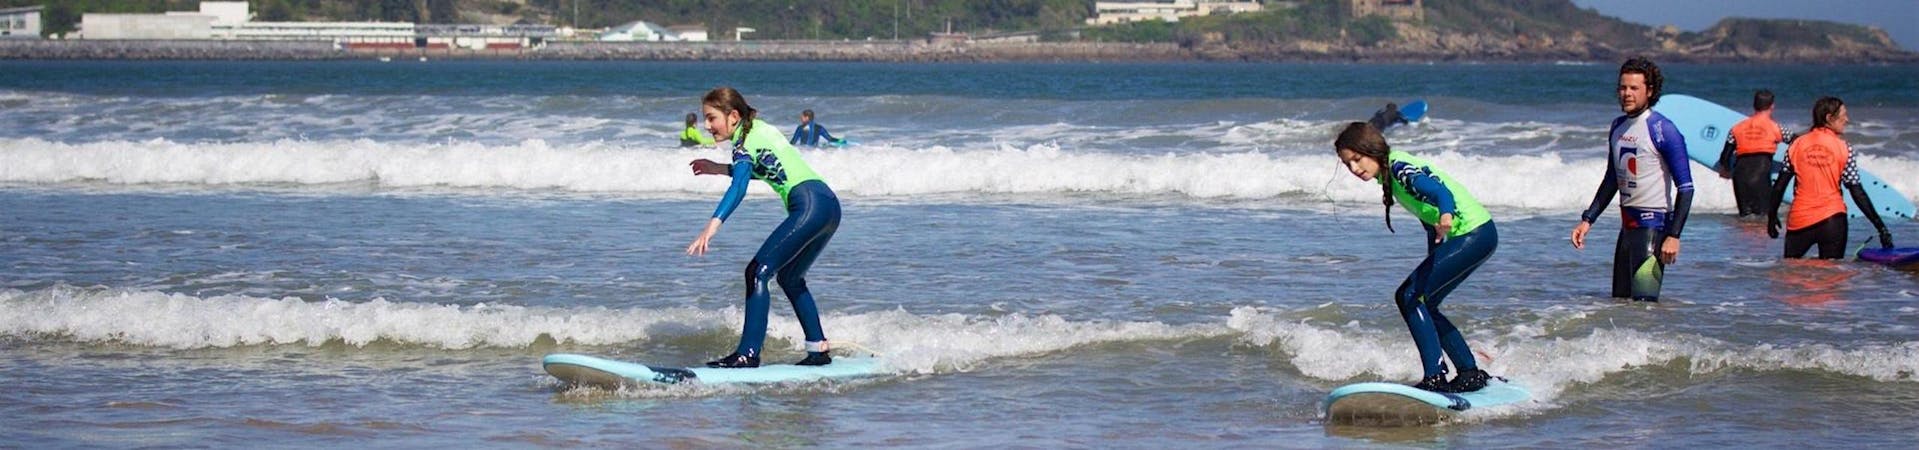 A kid is having Private Surfing Lessons - Hendaye Beach - All Levels with Gold Coast Hendaye.